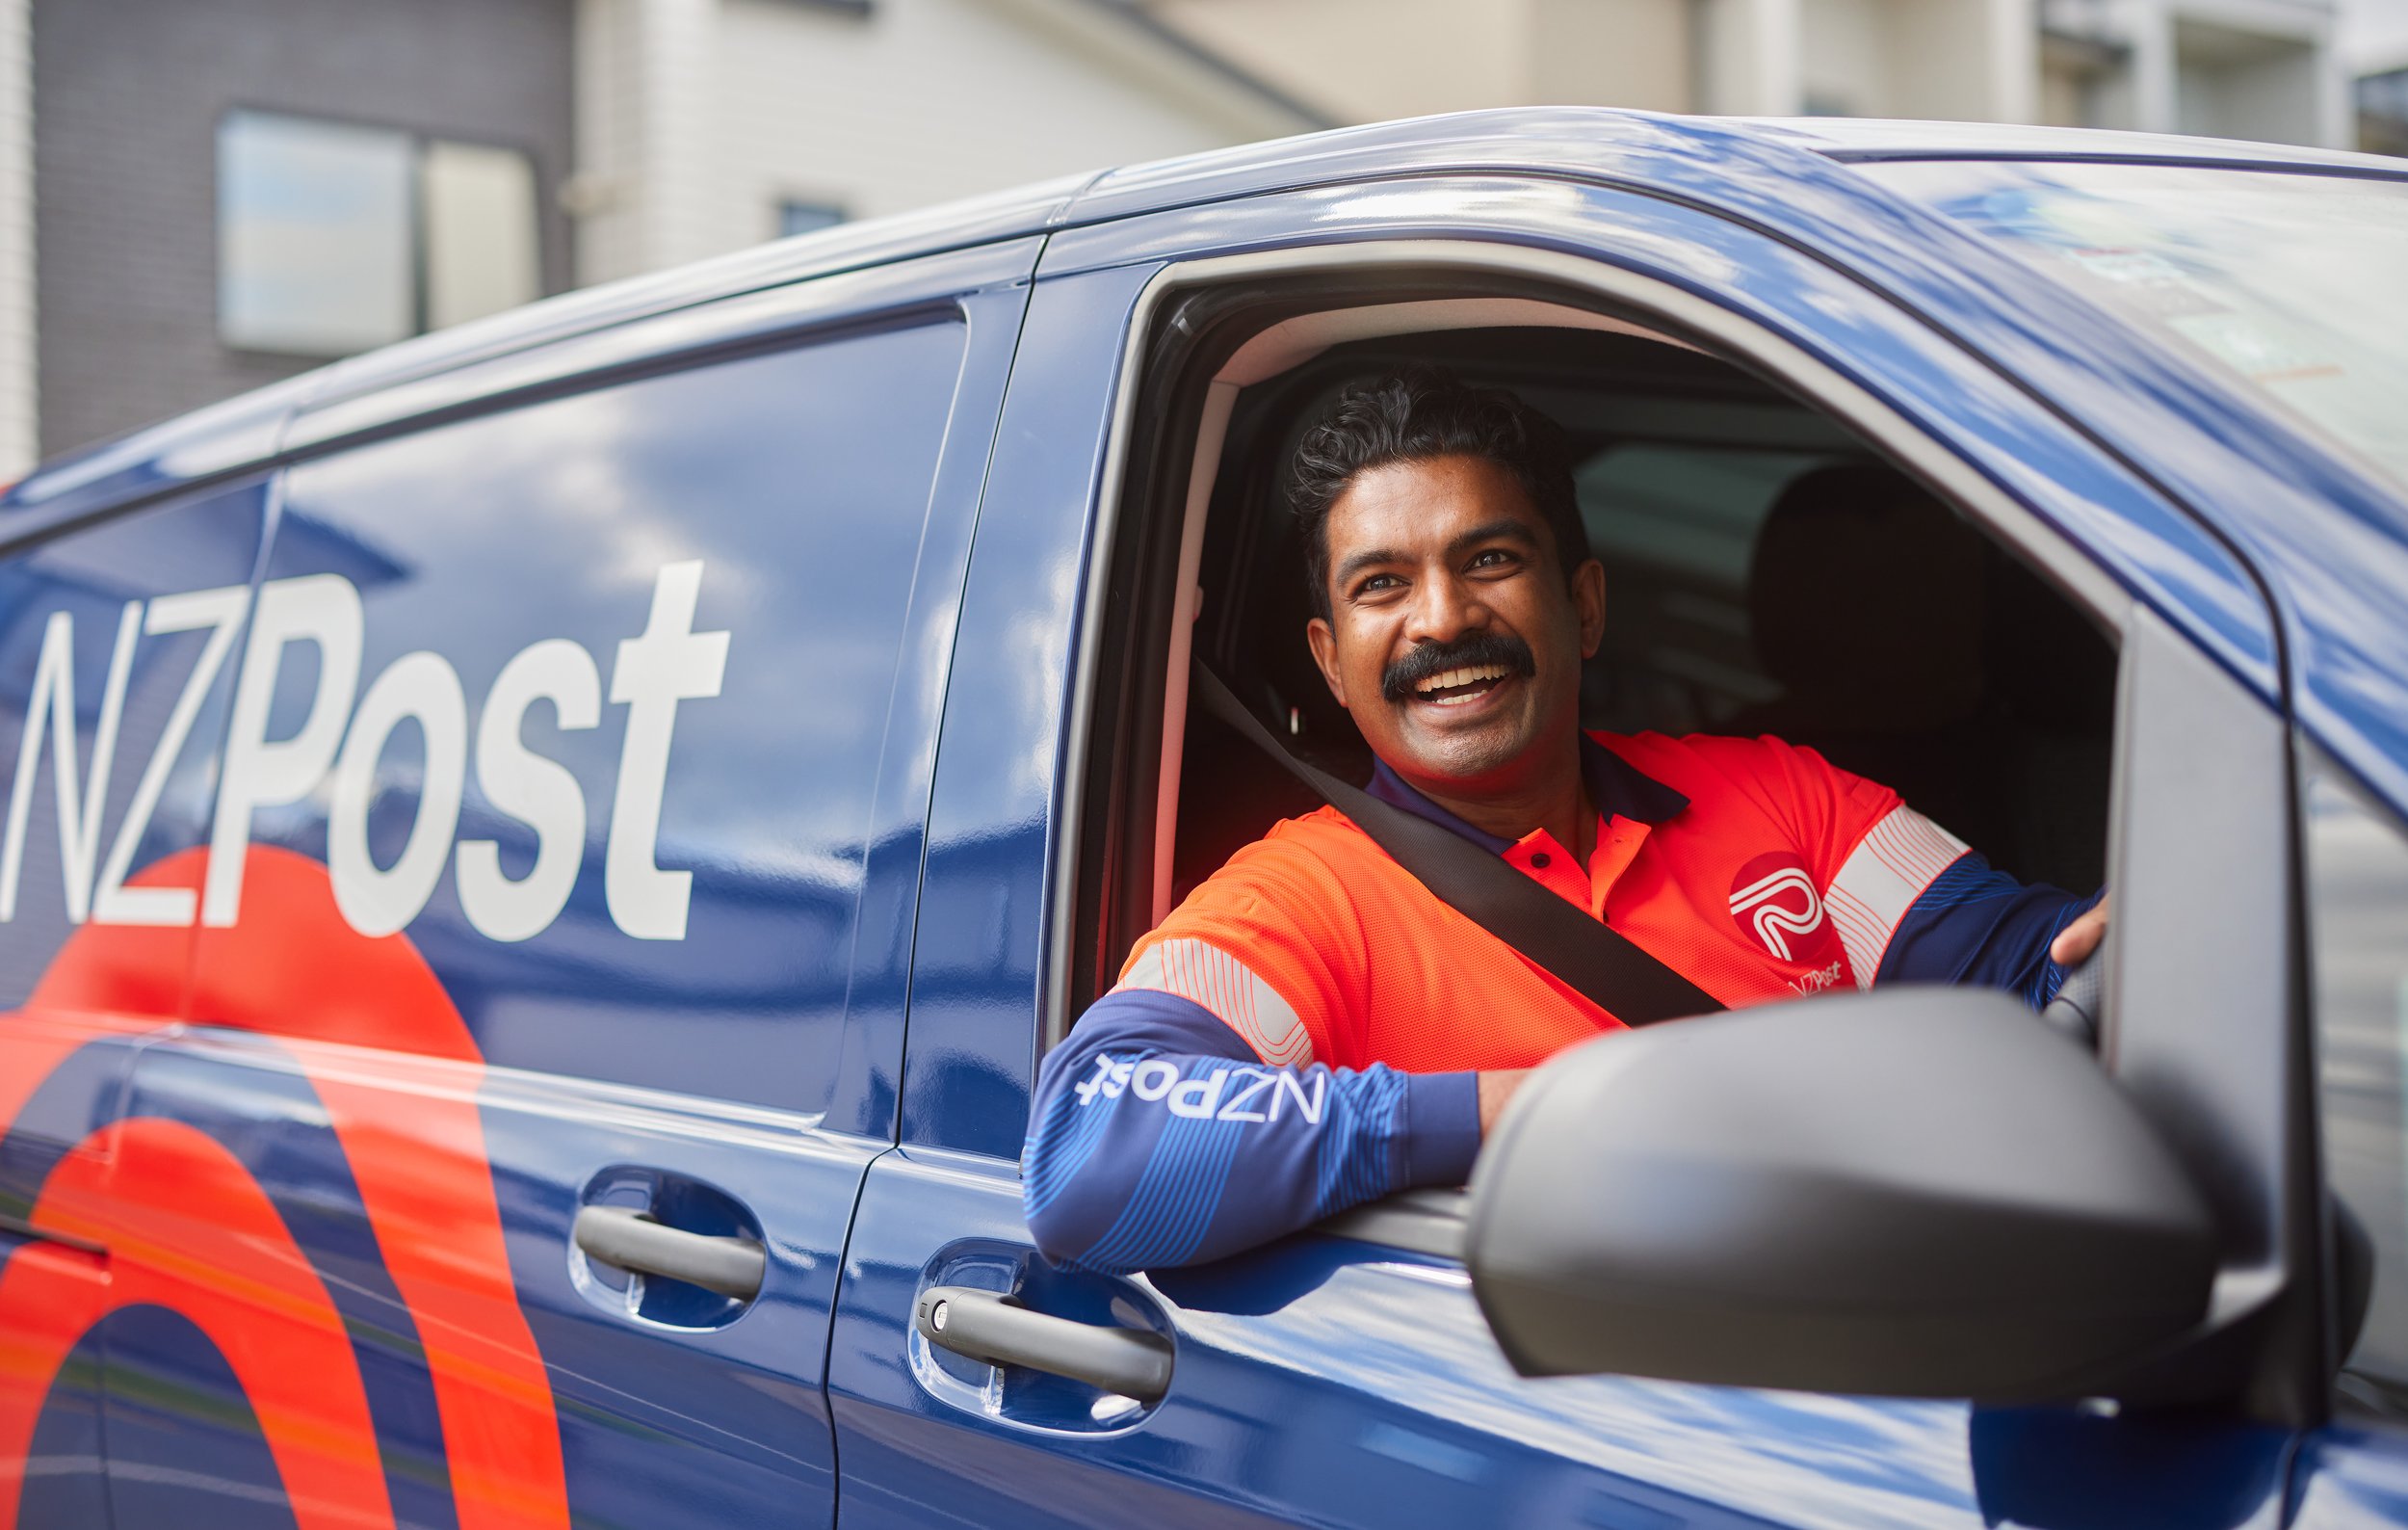 NZ Post - Consumer Delivery September 2022 (Final Selects)-67.jpg